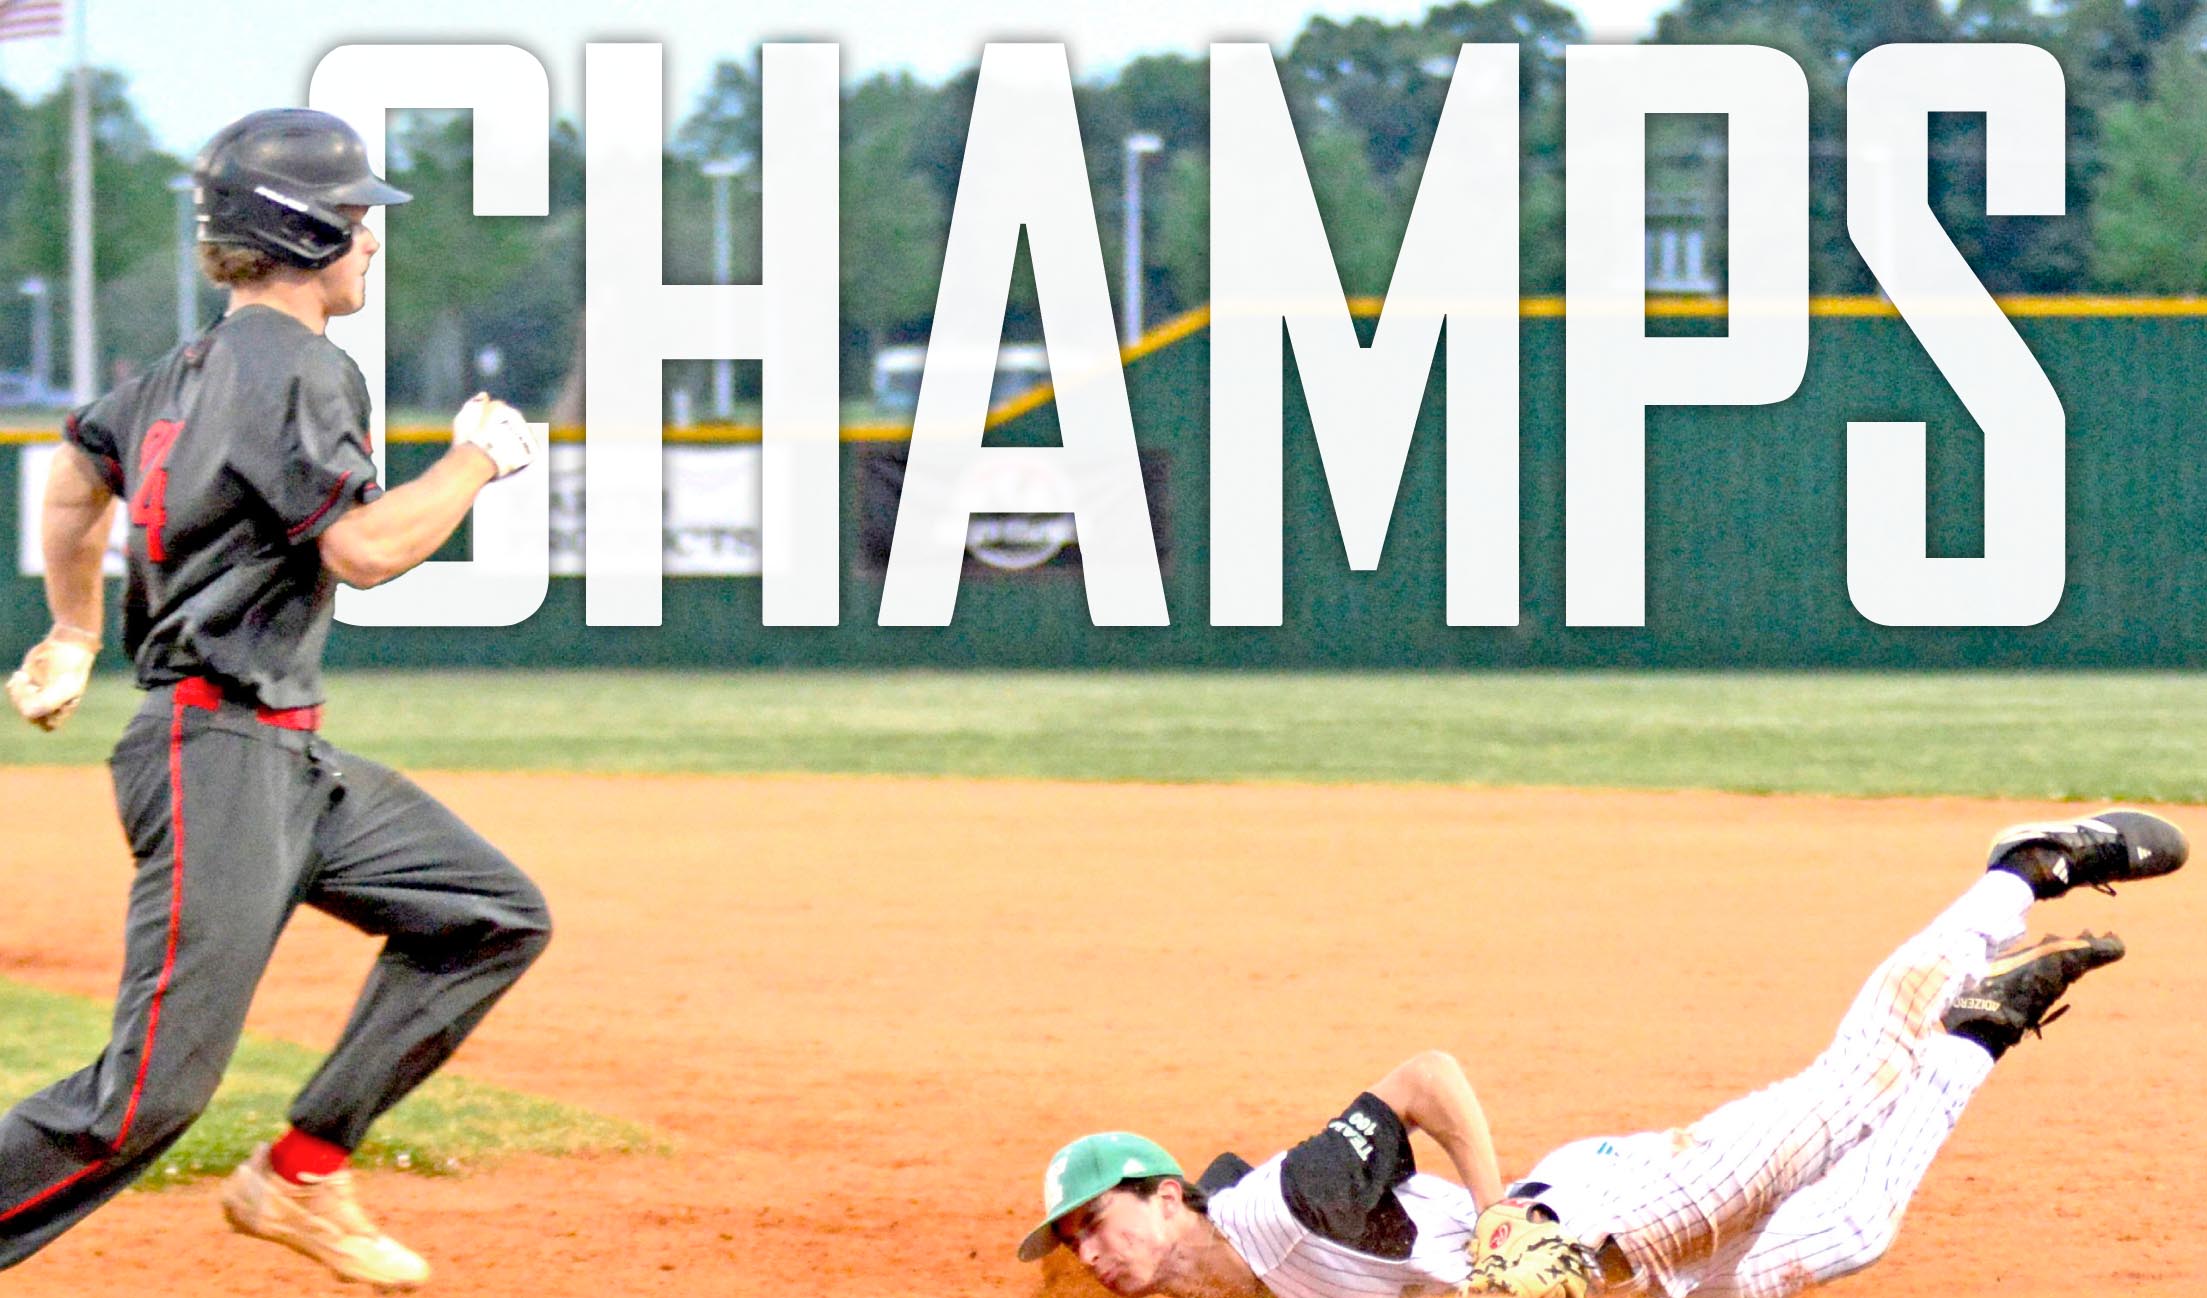 Easley tops Greenville to win region championship